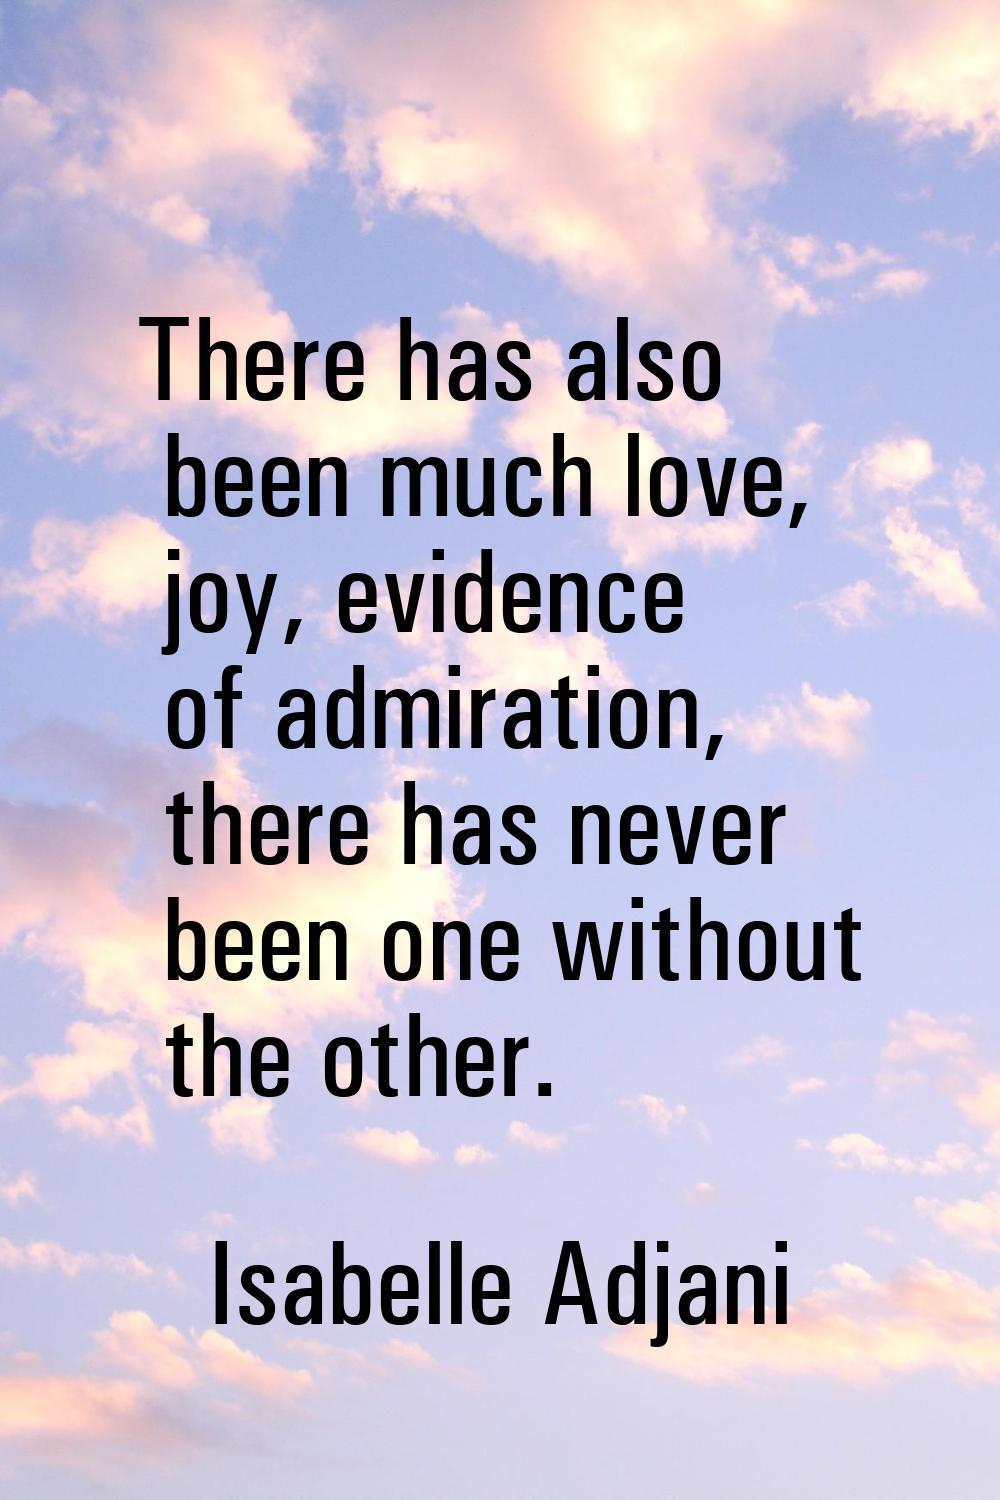 There has also been much love, joy, evidence of admiration, there has never been one without the ot